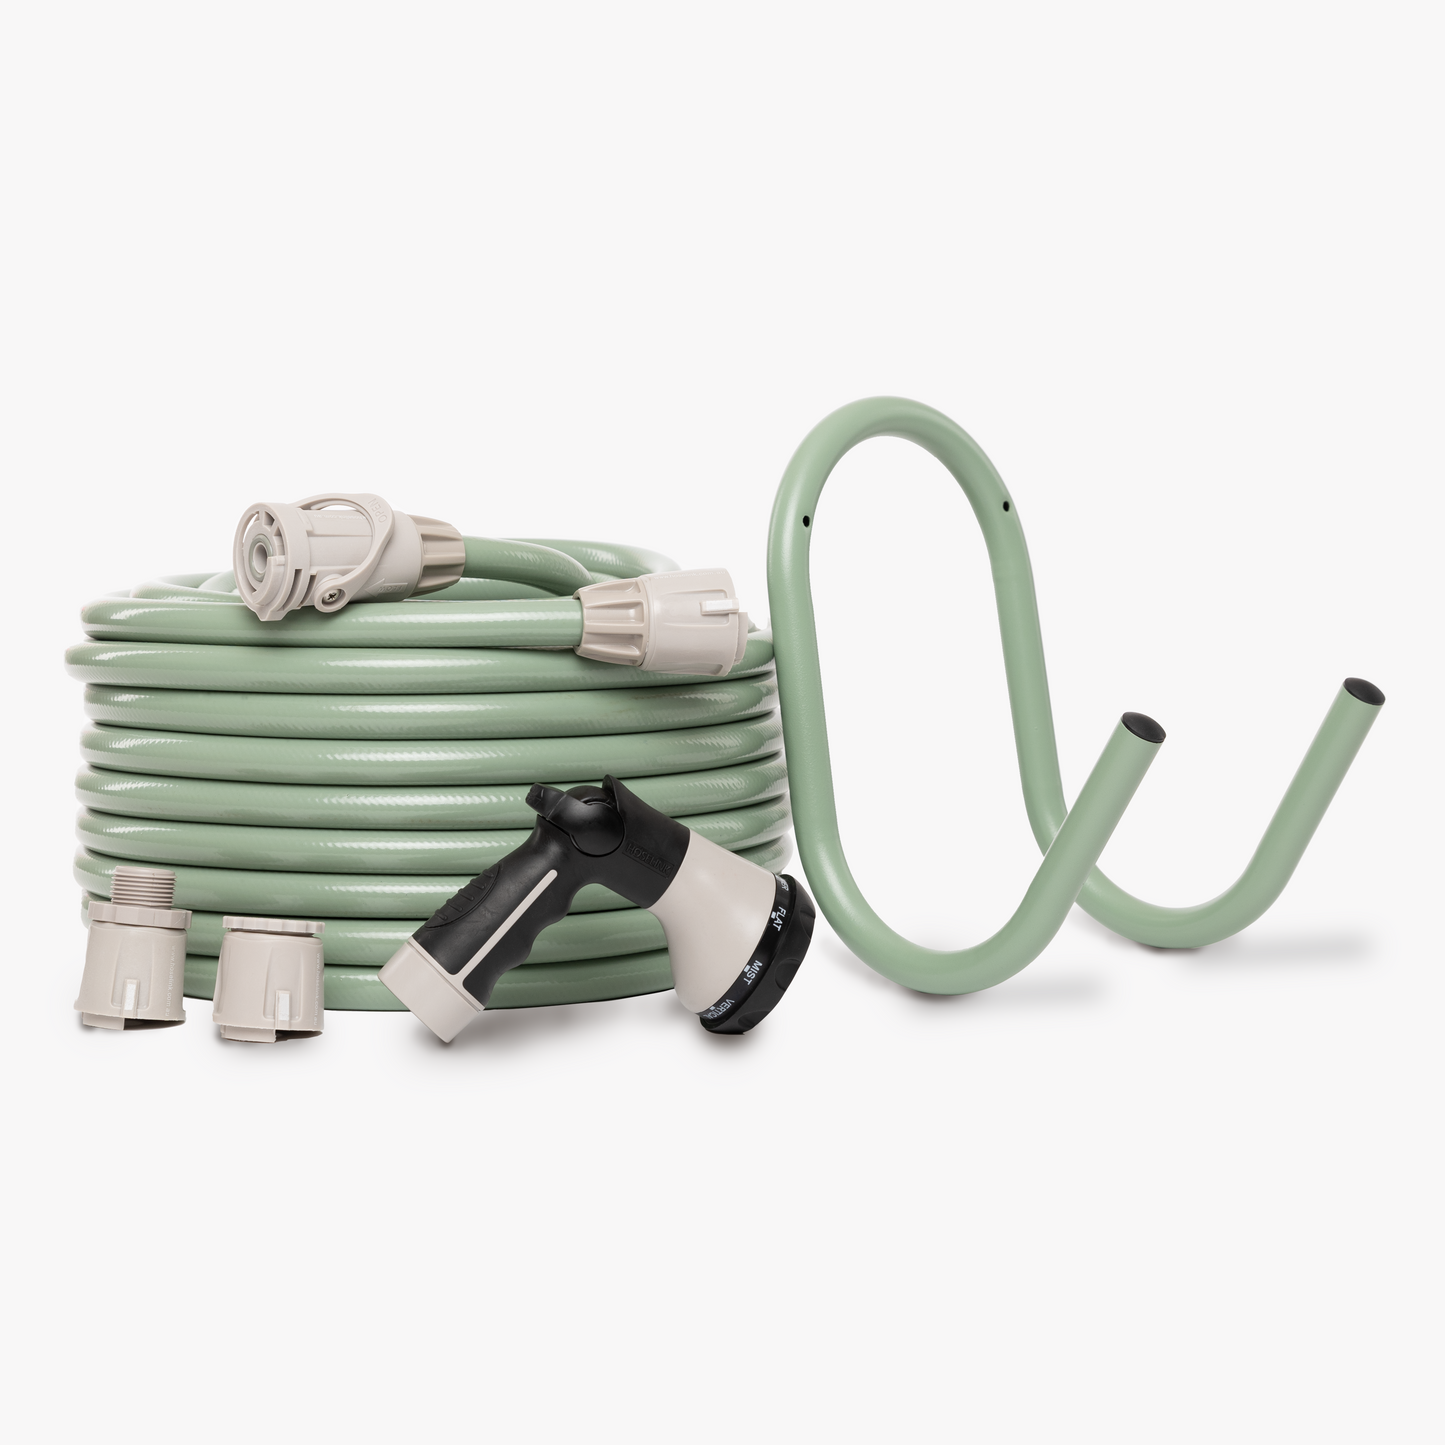 Sage green hose and hanger with grey hose fittings and spray gun on white background